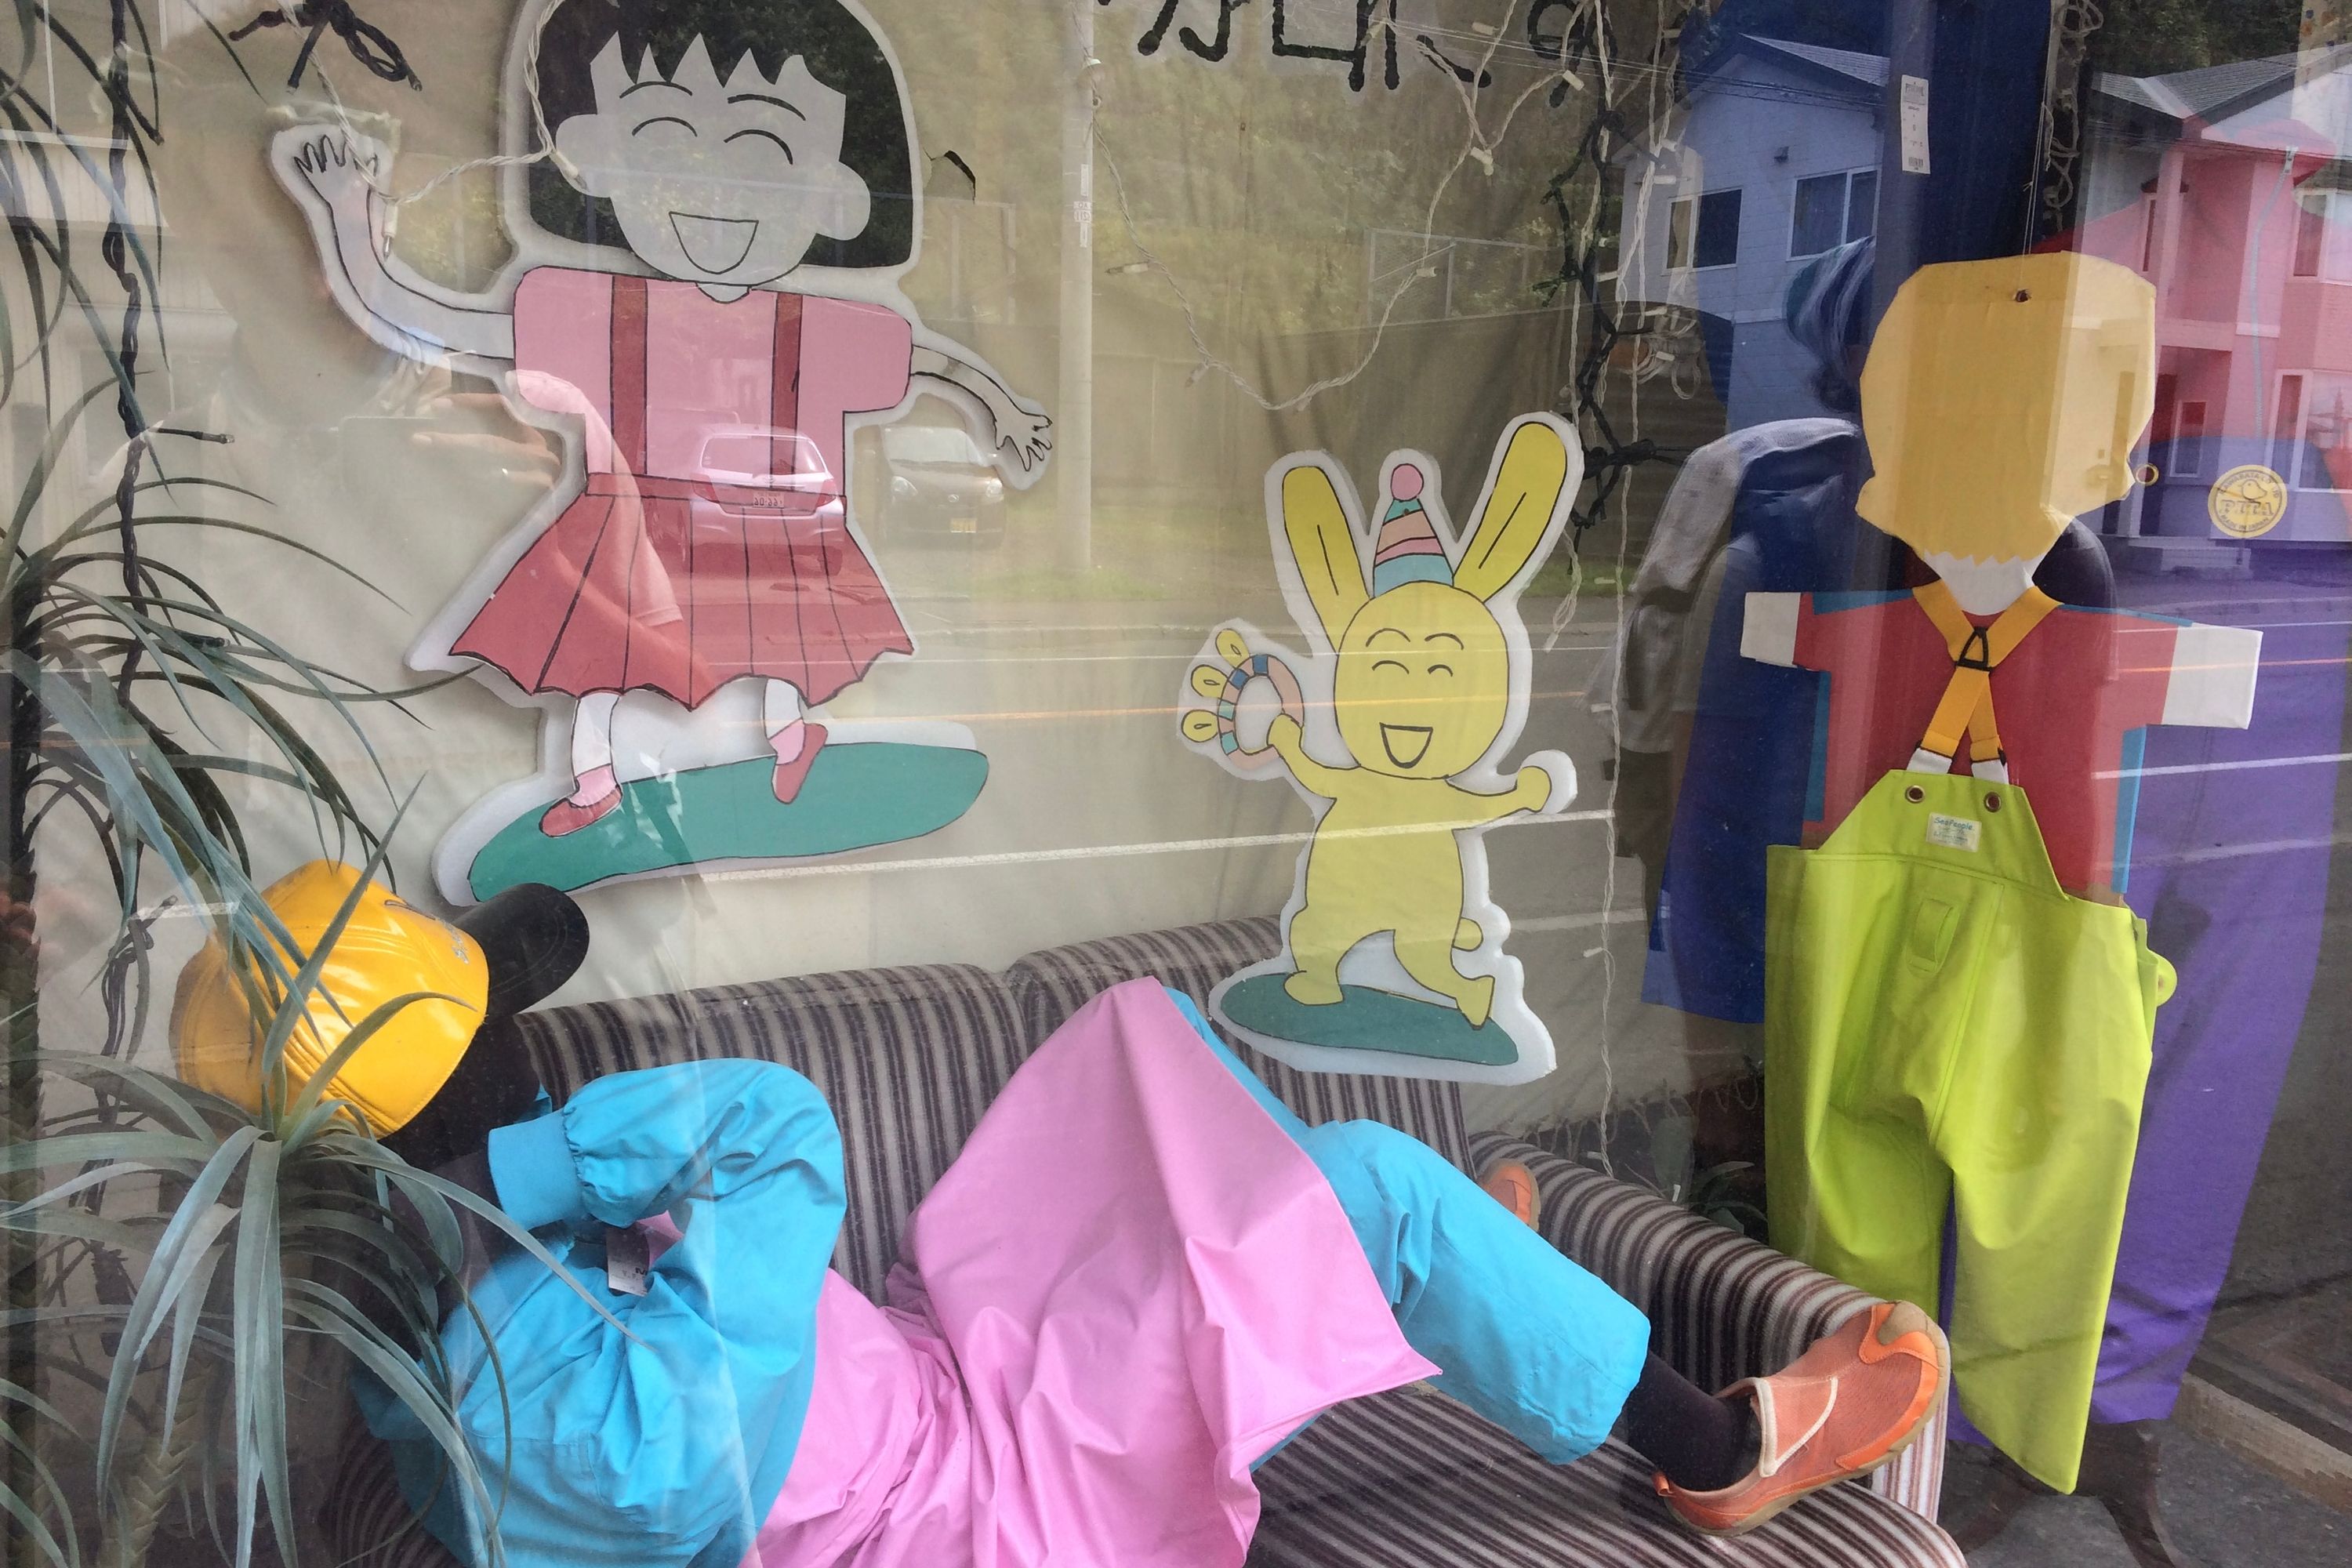 A person in colorful clothes rests among other colorful things in the window display of a shop.